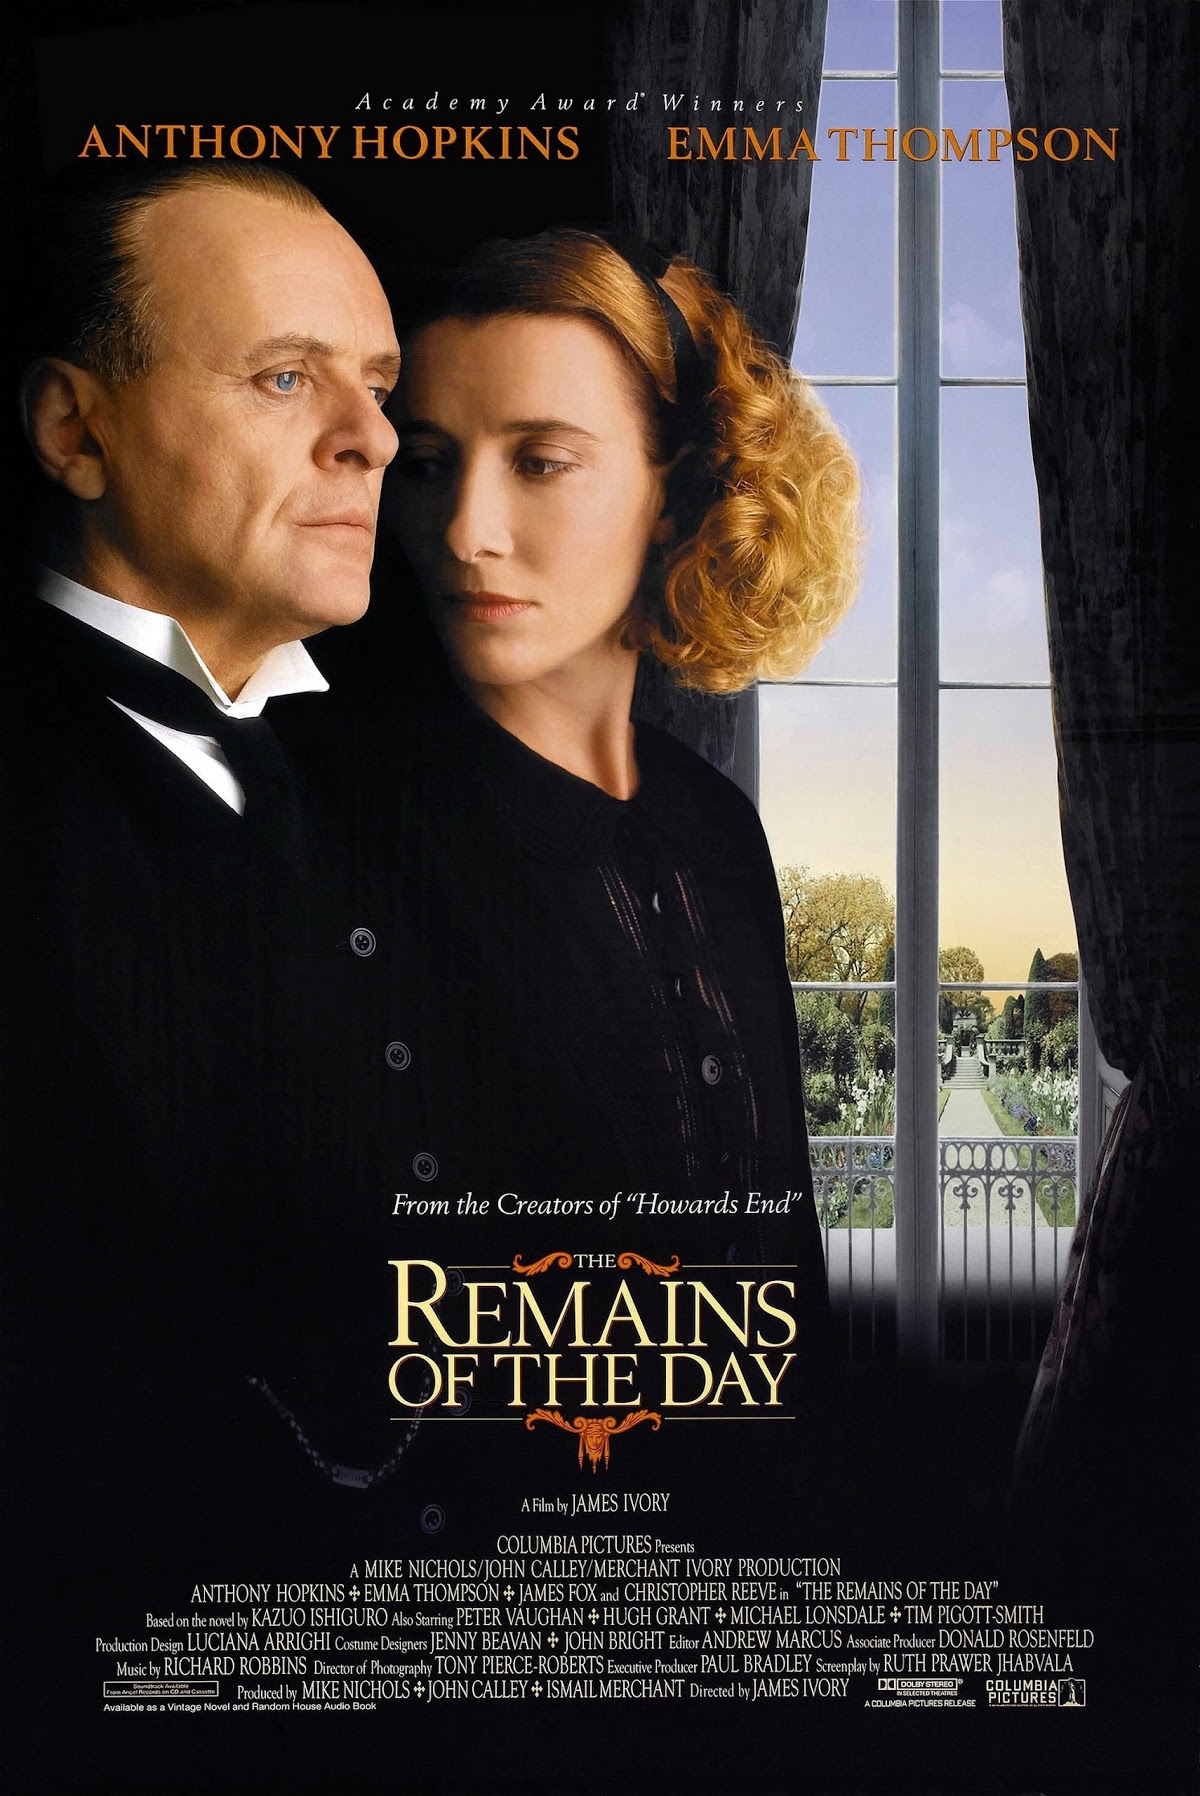 The Remains of the Day (1993) ★★★★★